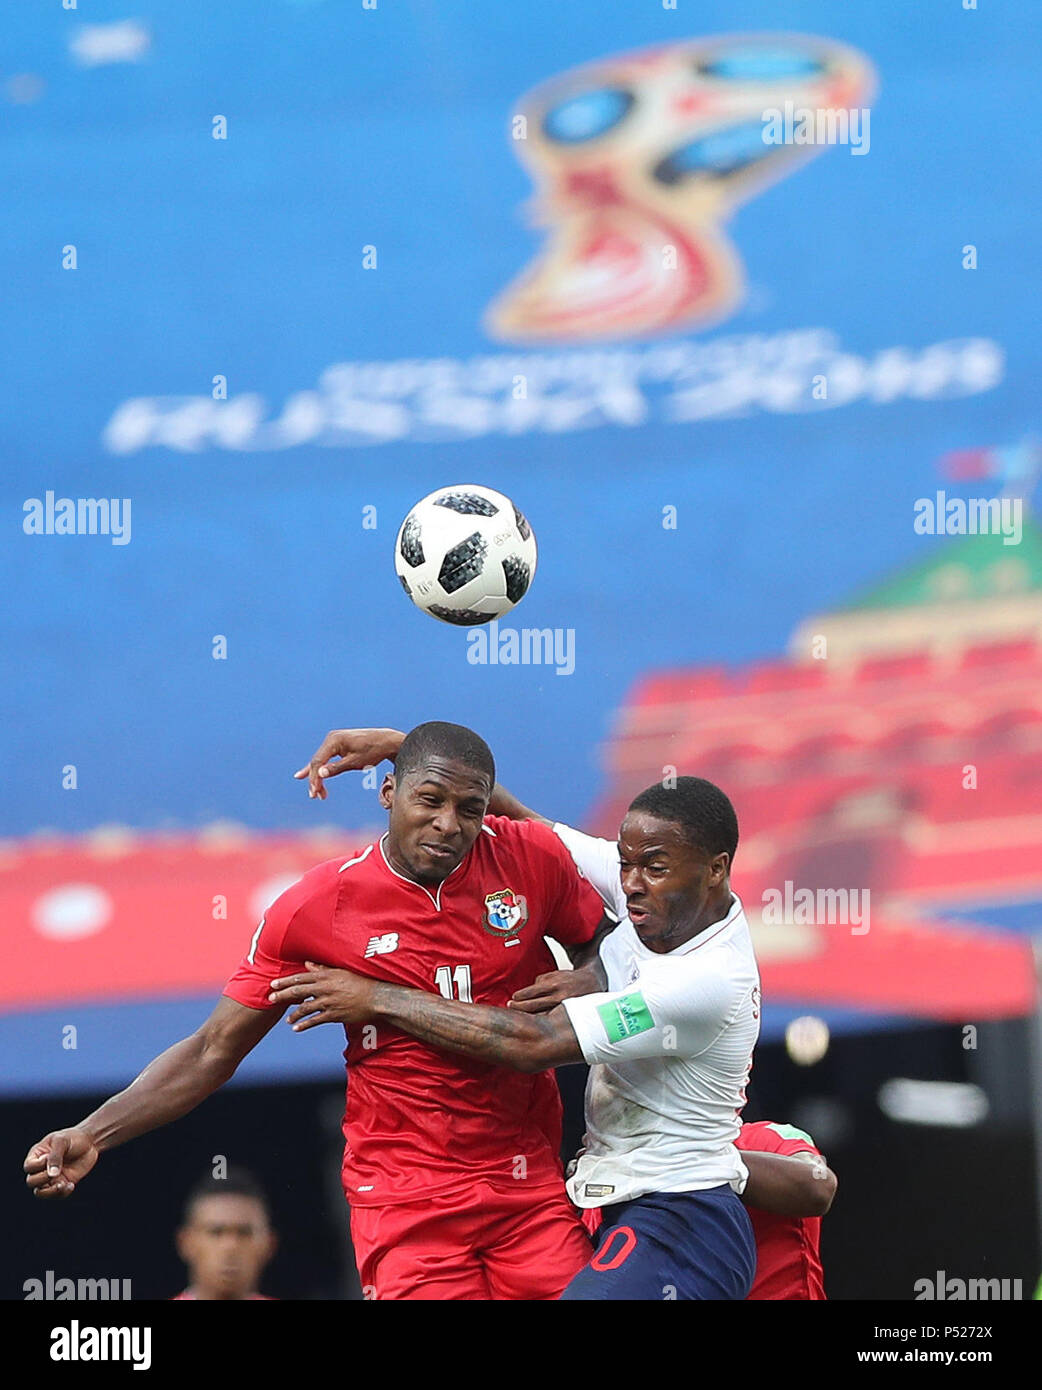 Nizhny Novgorod, Russia. 24th June, 2018. Raheem Sterling (R) of England competes for a header with Armando Cooper of Panama during the 2018 FIFA World Cup Group G match between England and Panama in Nizhny Novgorod, Russia, June 24, 2018. Credit: Xu Zijian/Xinhua/Alamy Live News Stock Photo